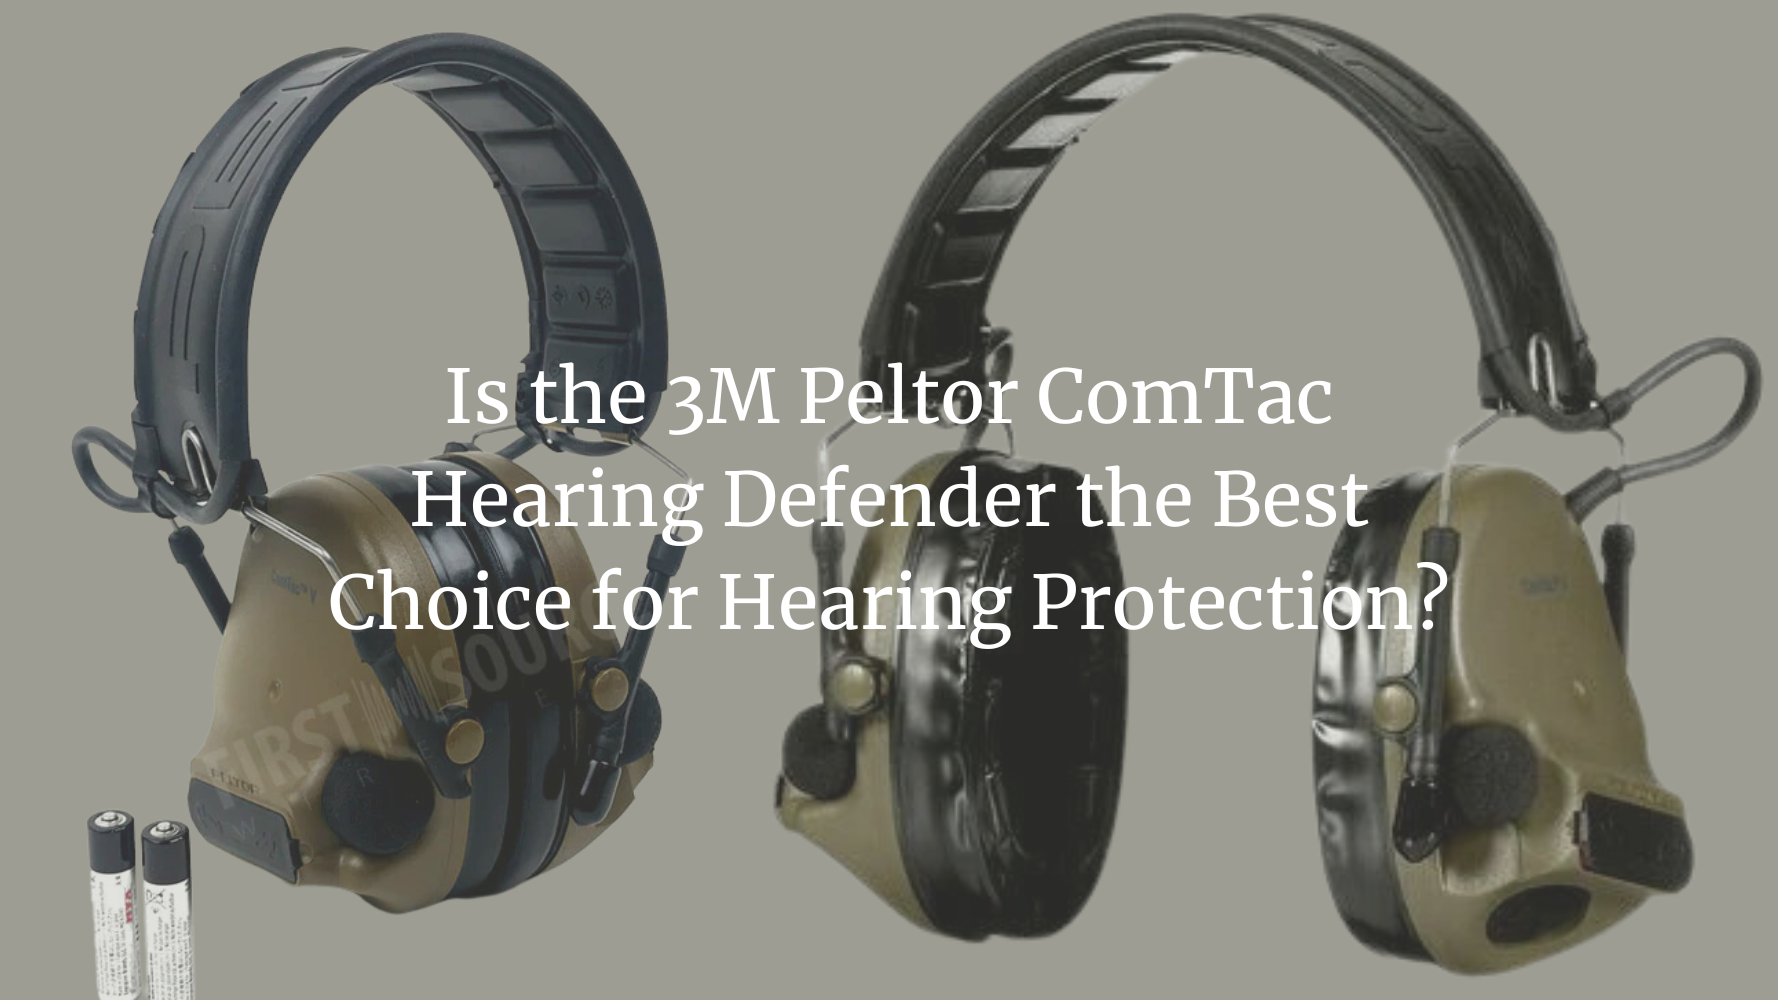 Is the 3M Peltor ComTac Hearing Defender the Best Choice for Hearing Protection?